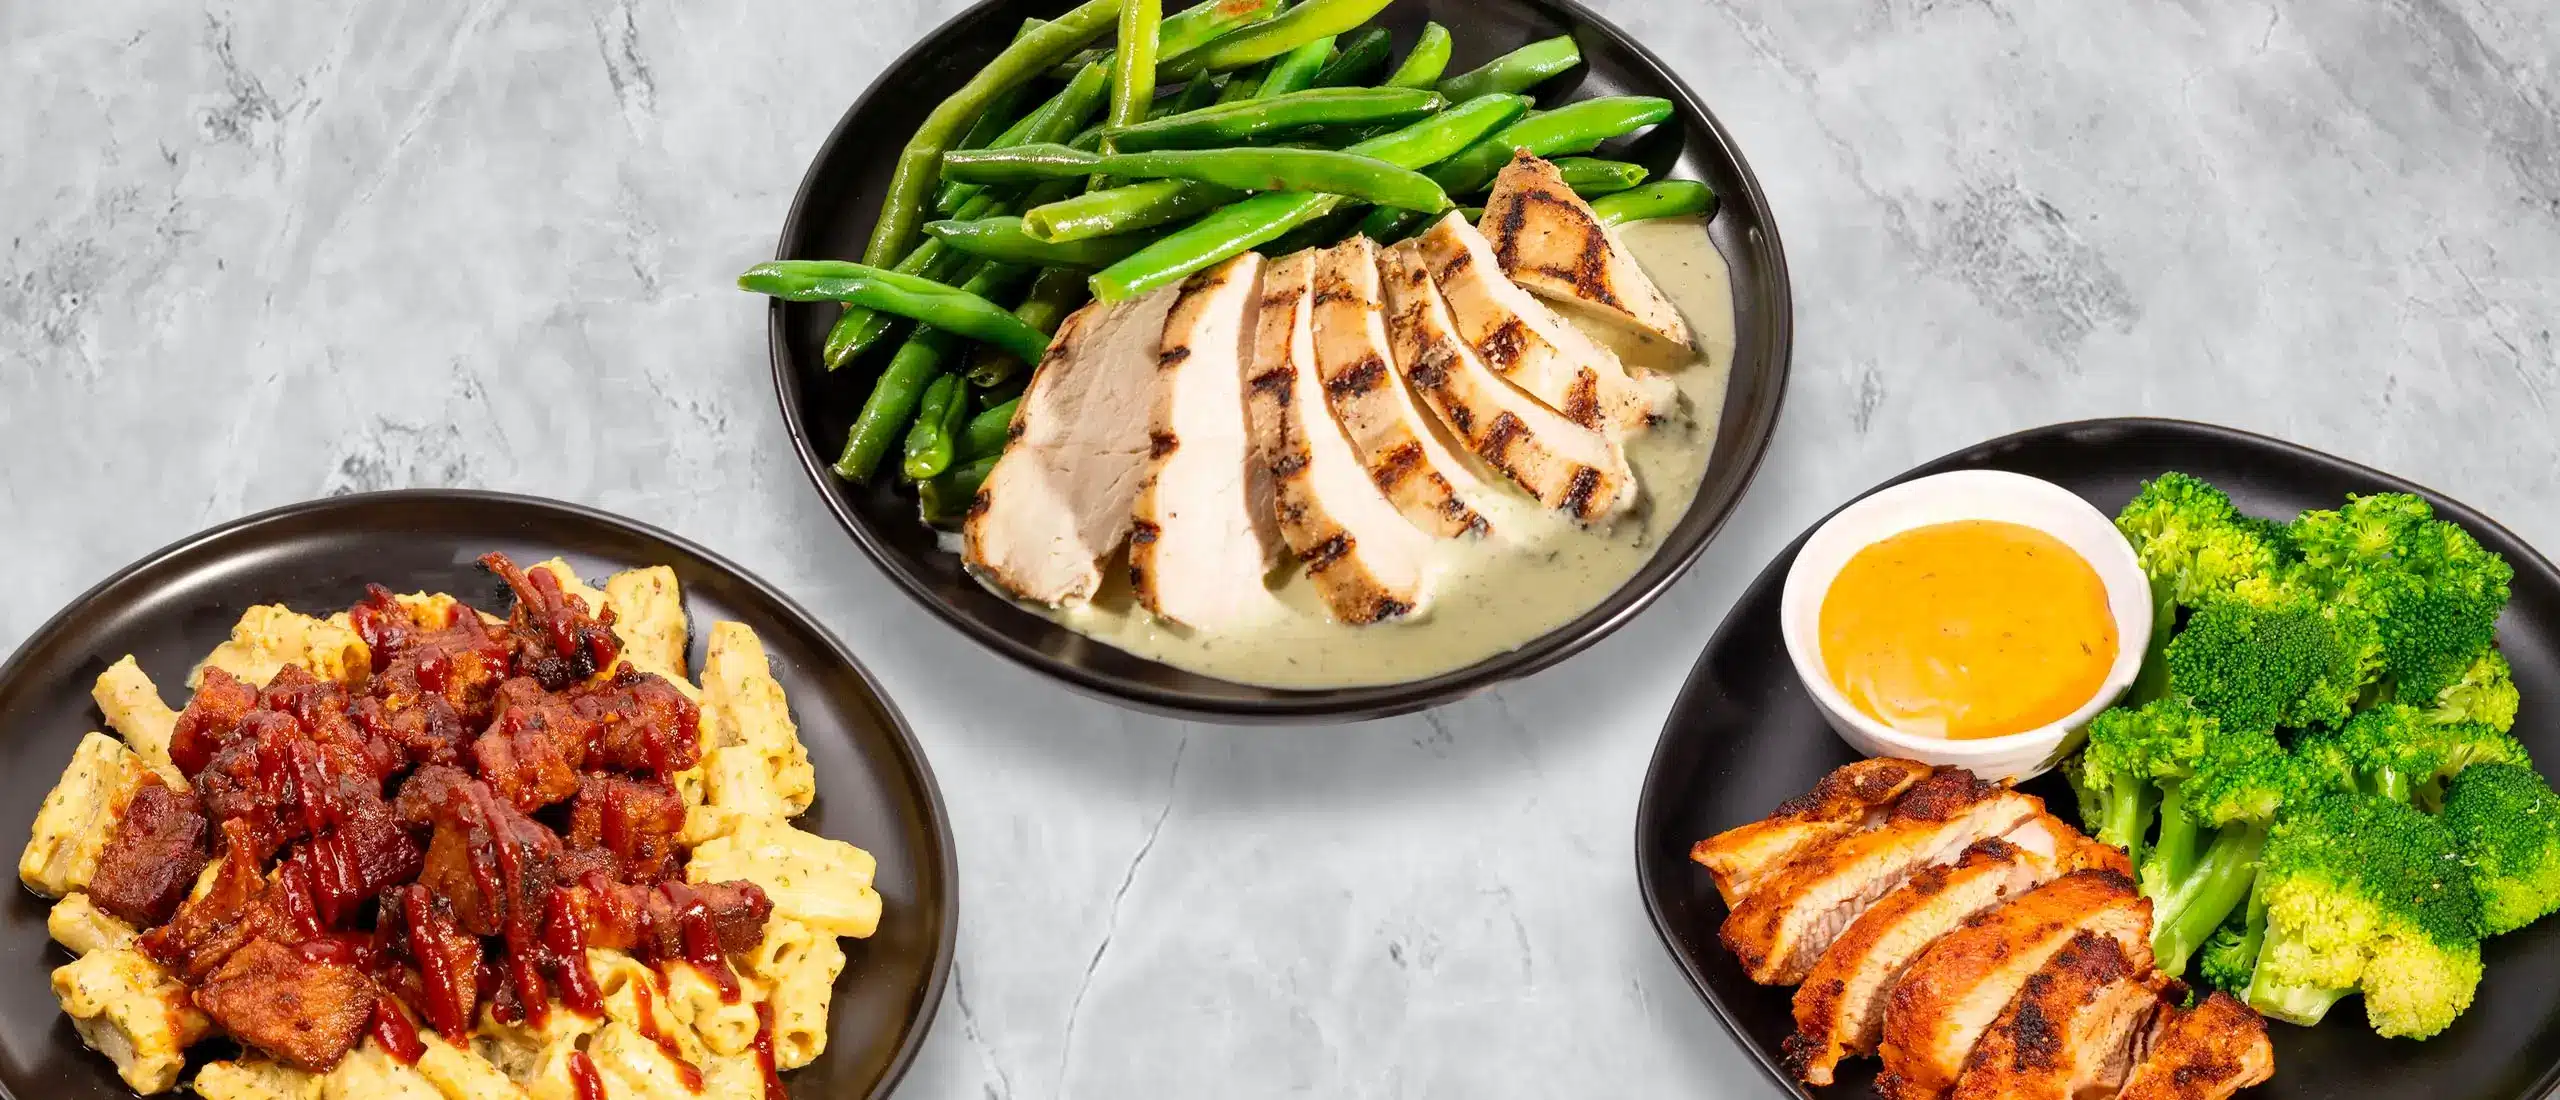 three meals from eat to evolve meal plan company